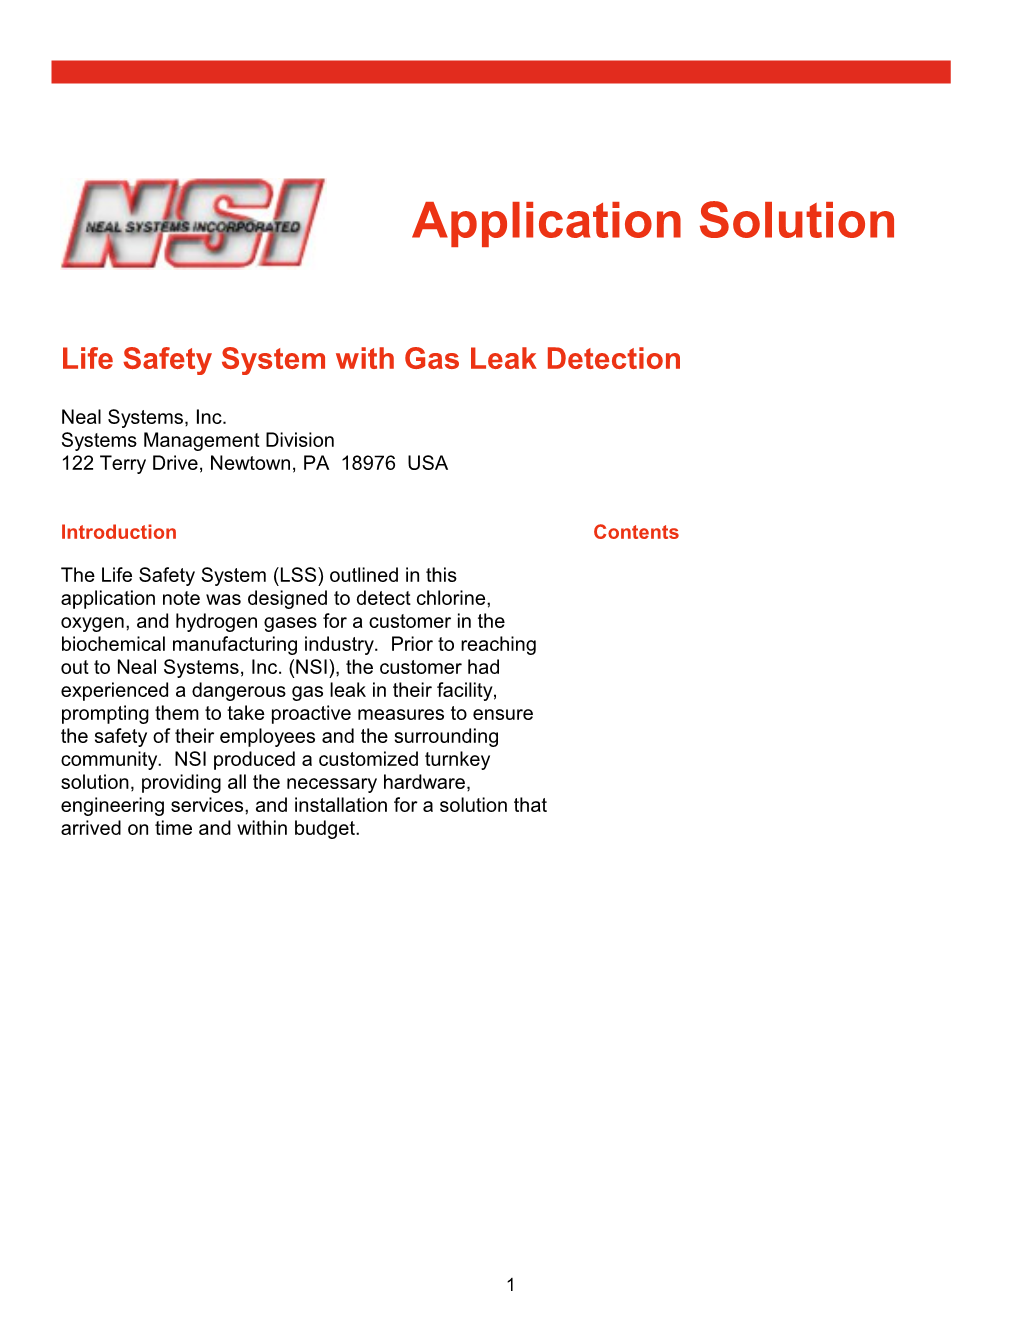 Life Safety System with Gas Leak Detection